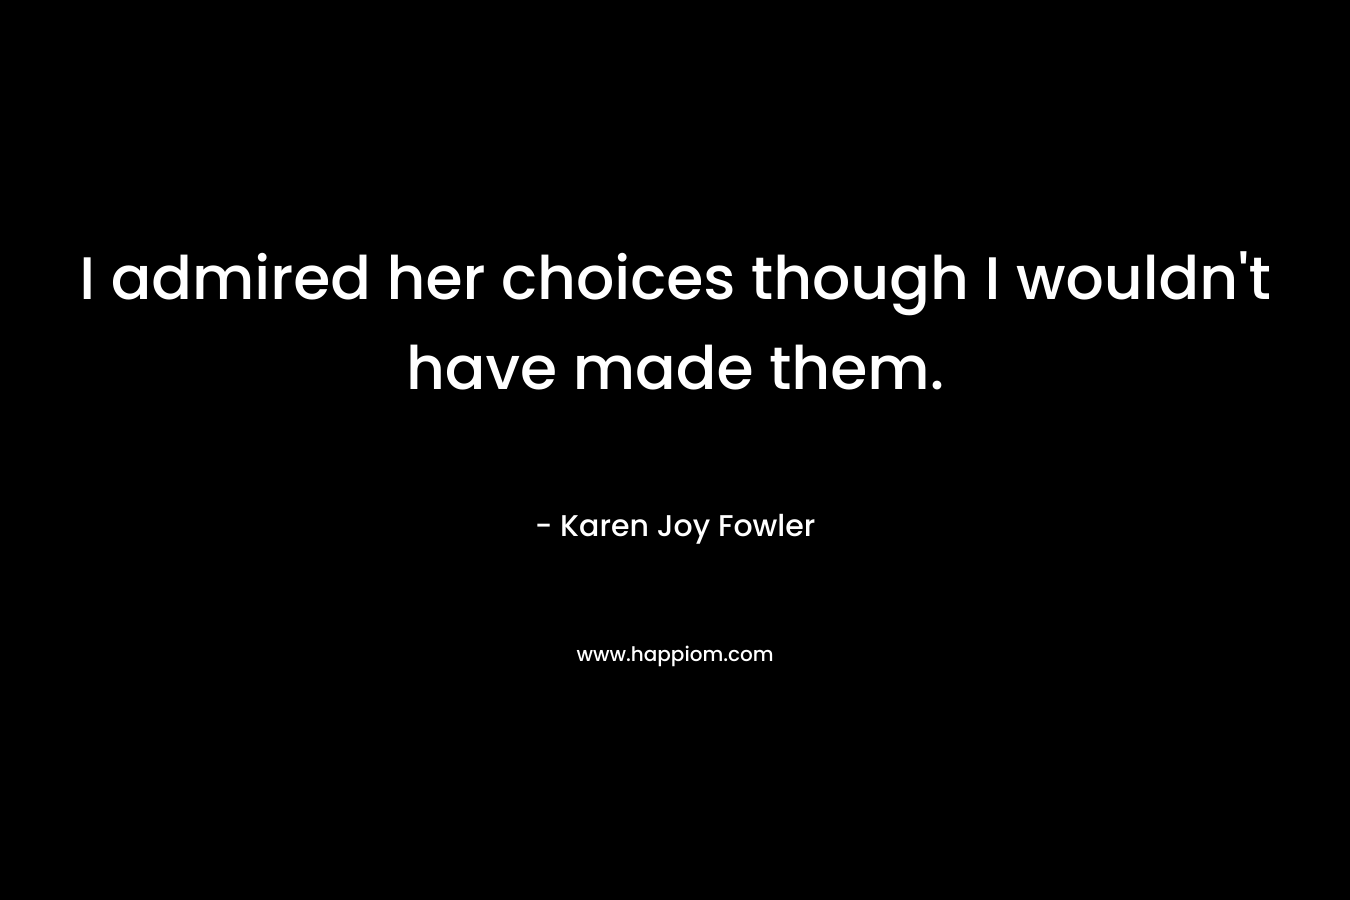 I admired her choices though I wouldn’t have made them. – Karen Joy Fowler